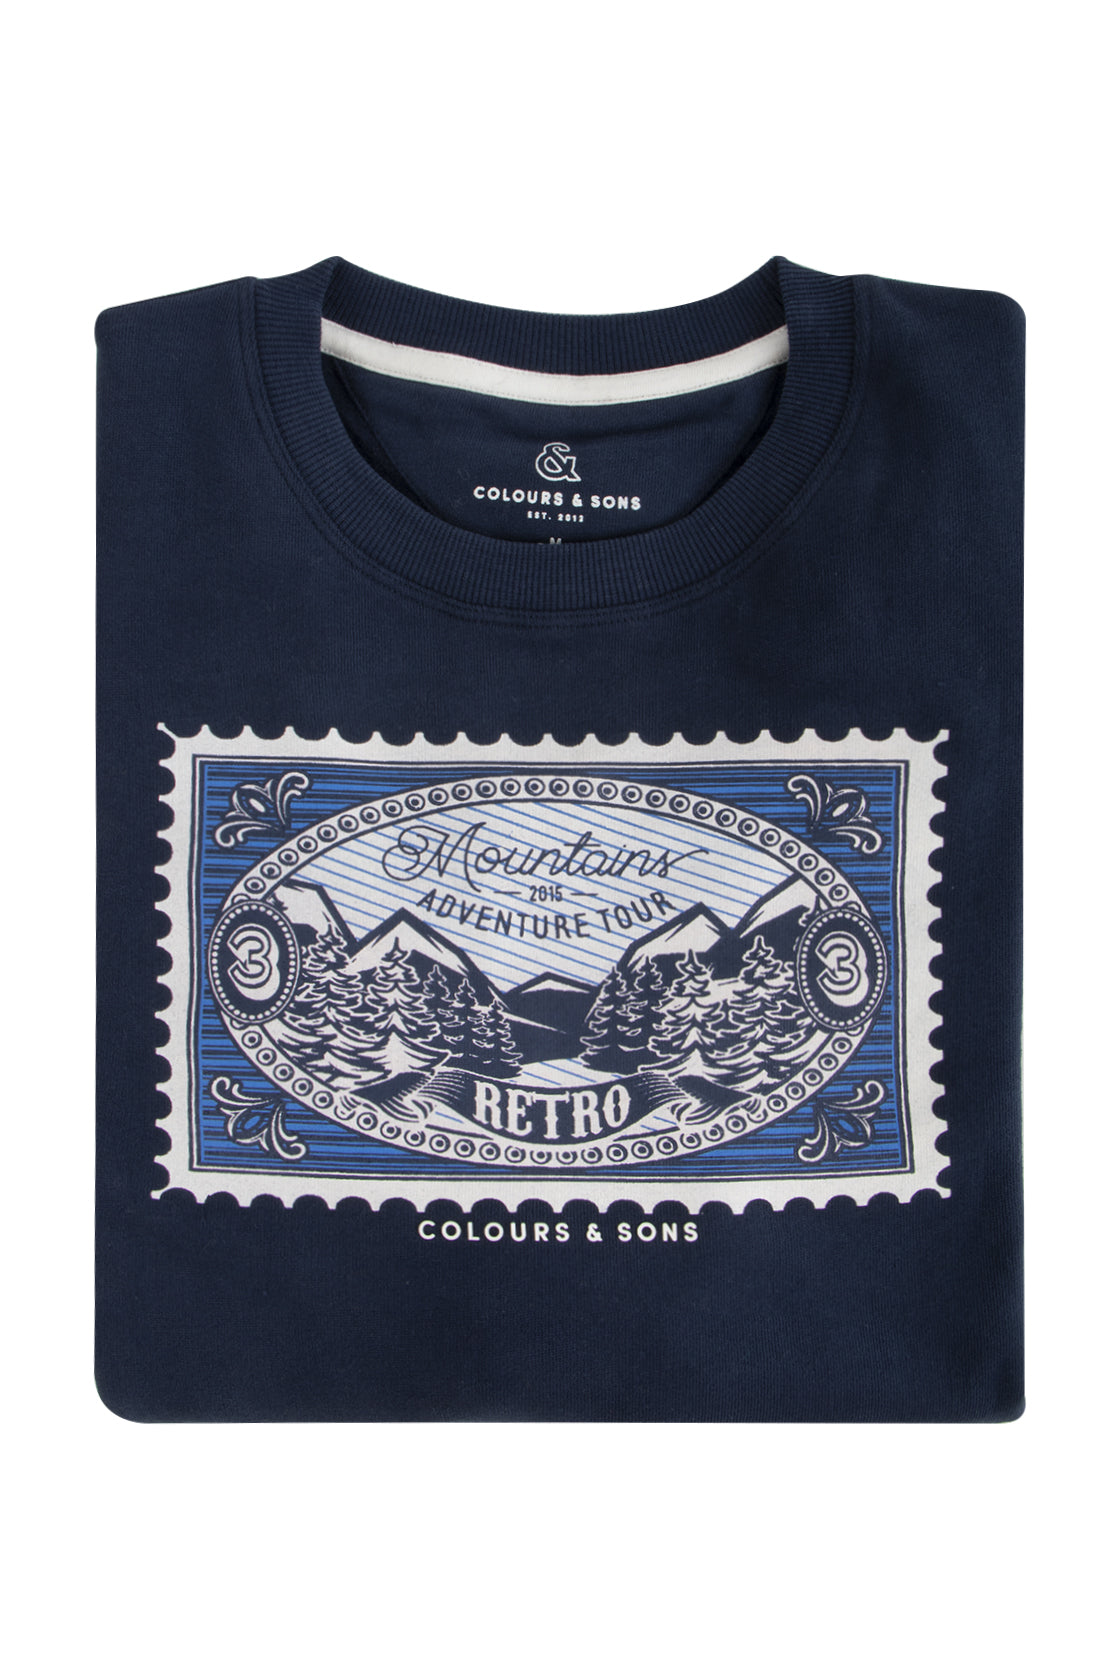 Colours & Sons Crew Sweater Navy